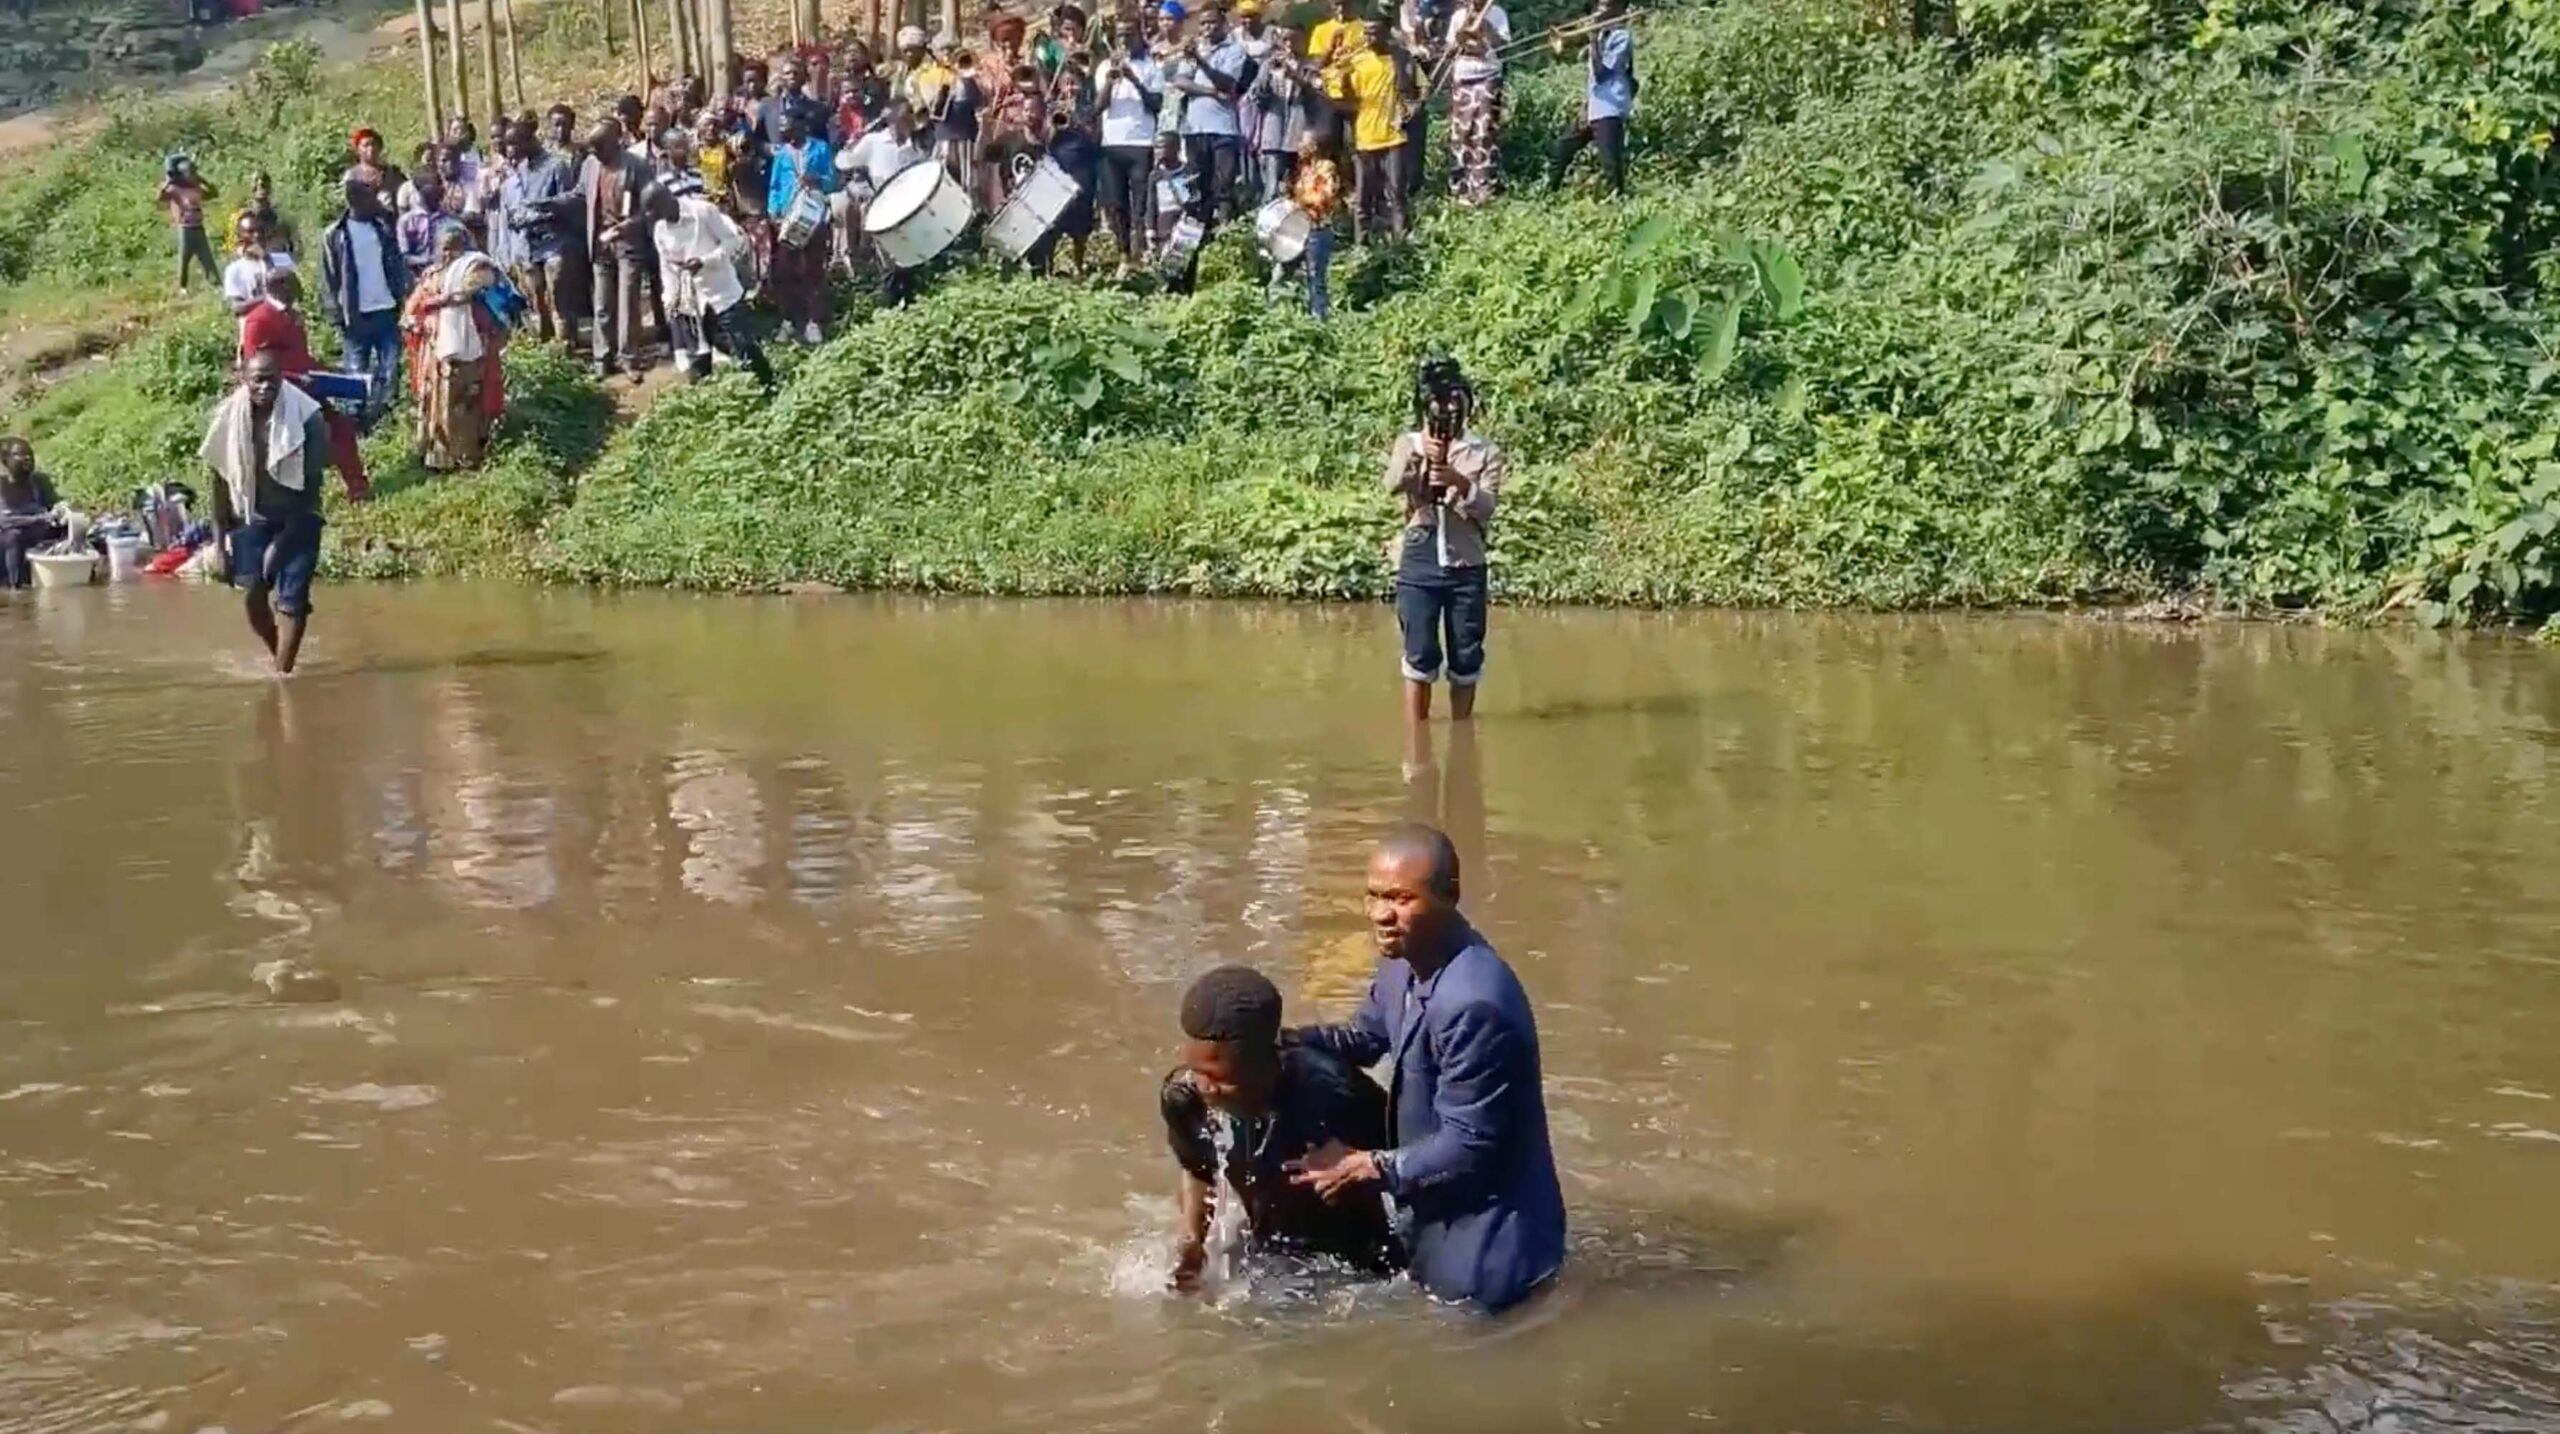 Singing, dancing and baptisms one year after deadly attack on church in DRC